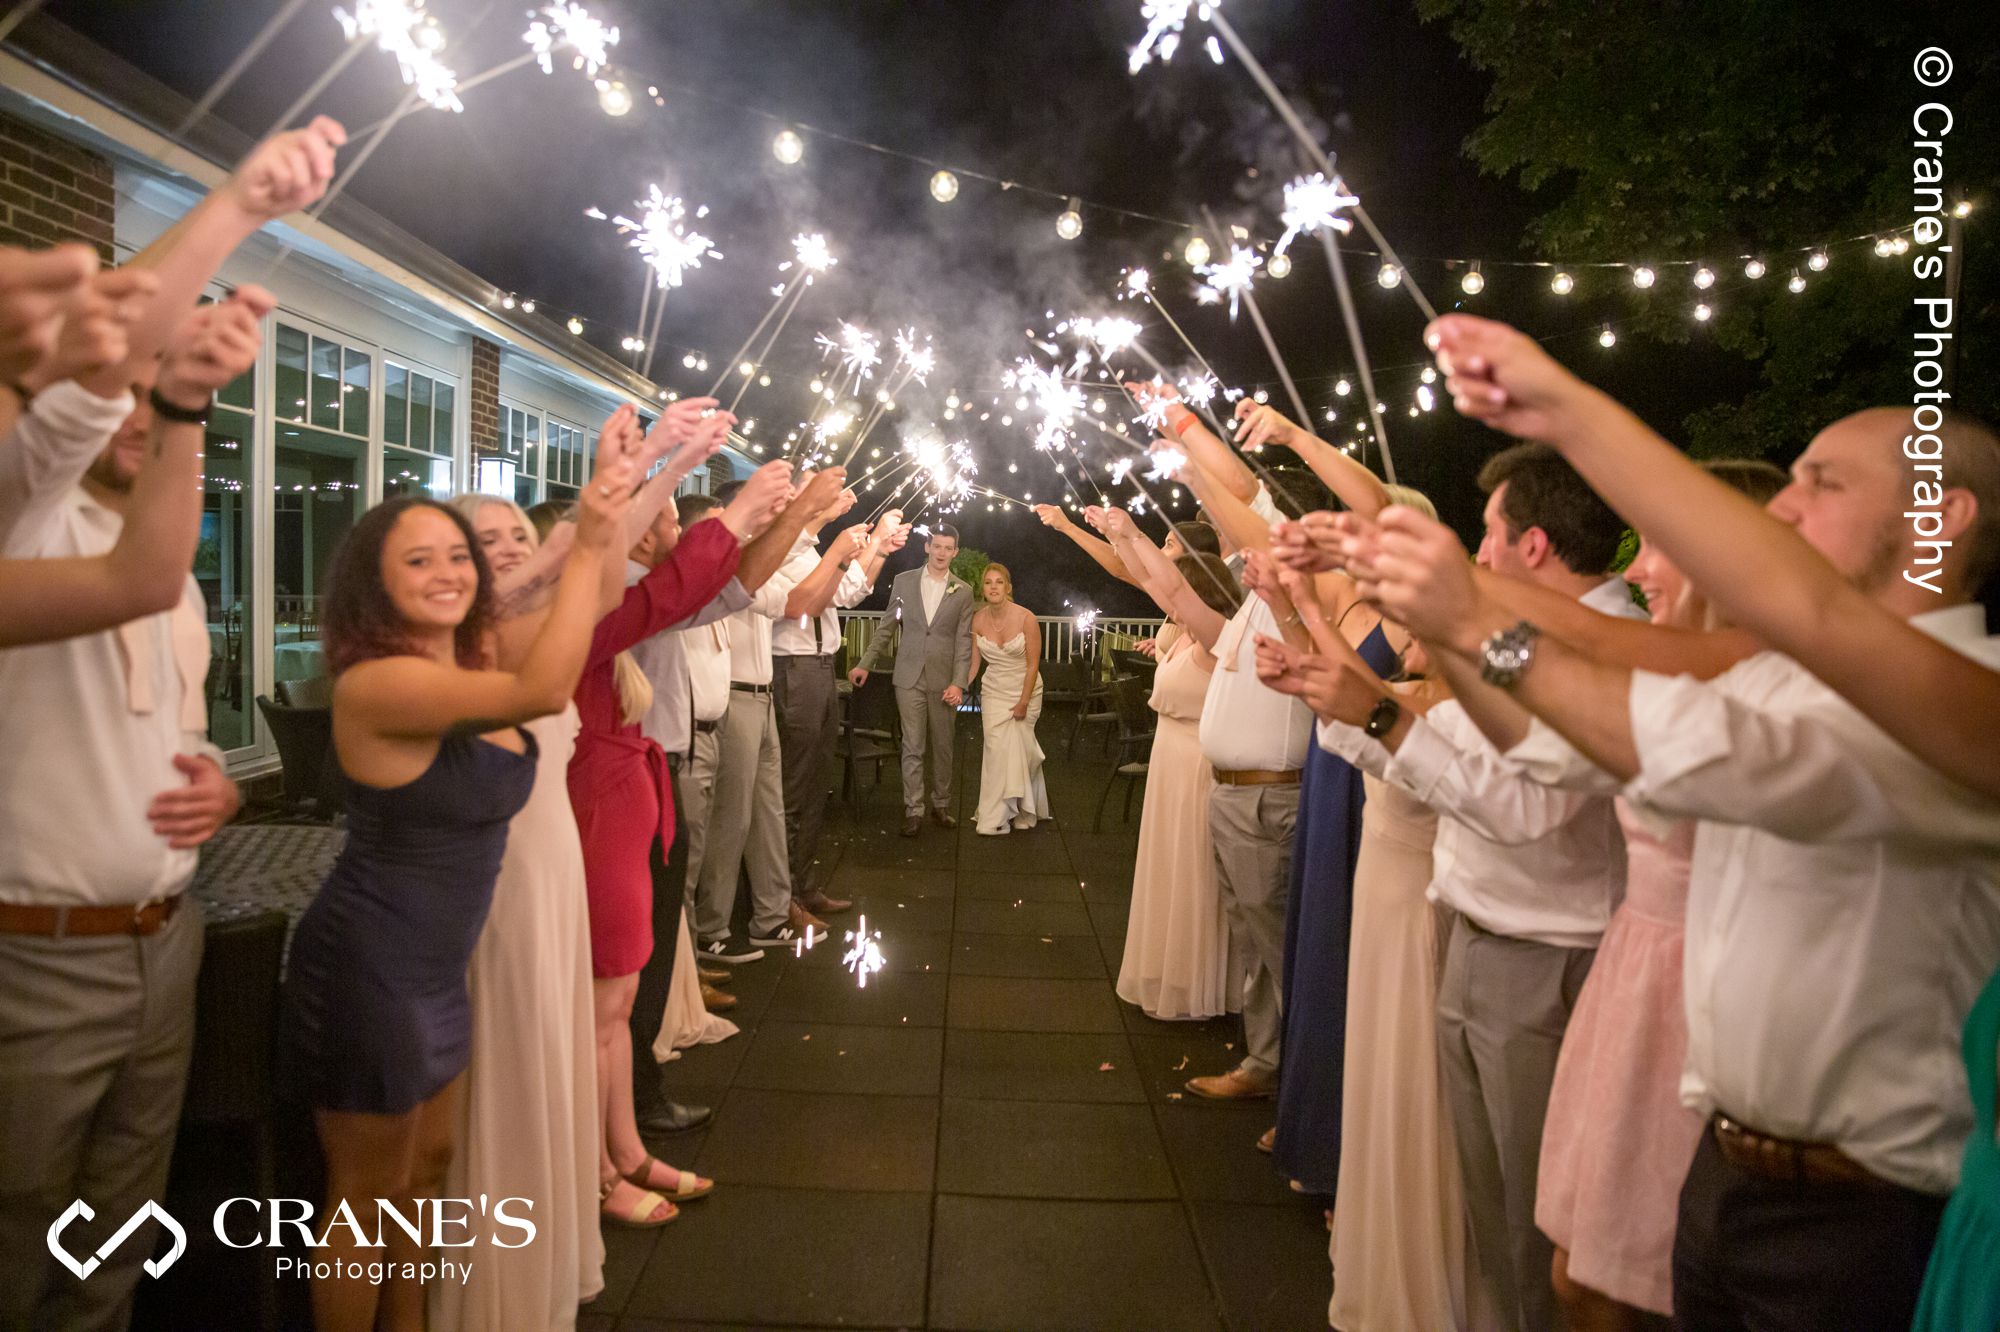 A wedding sparklers sent-off on the terrace of Big Foot Country Club